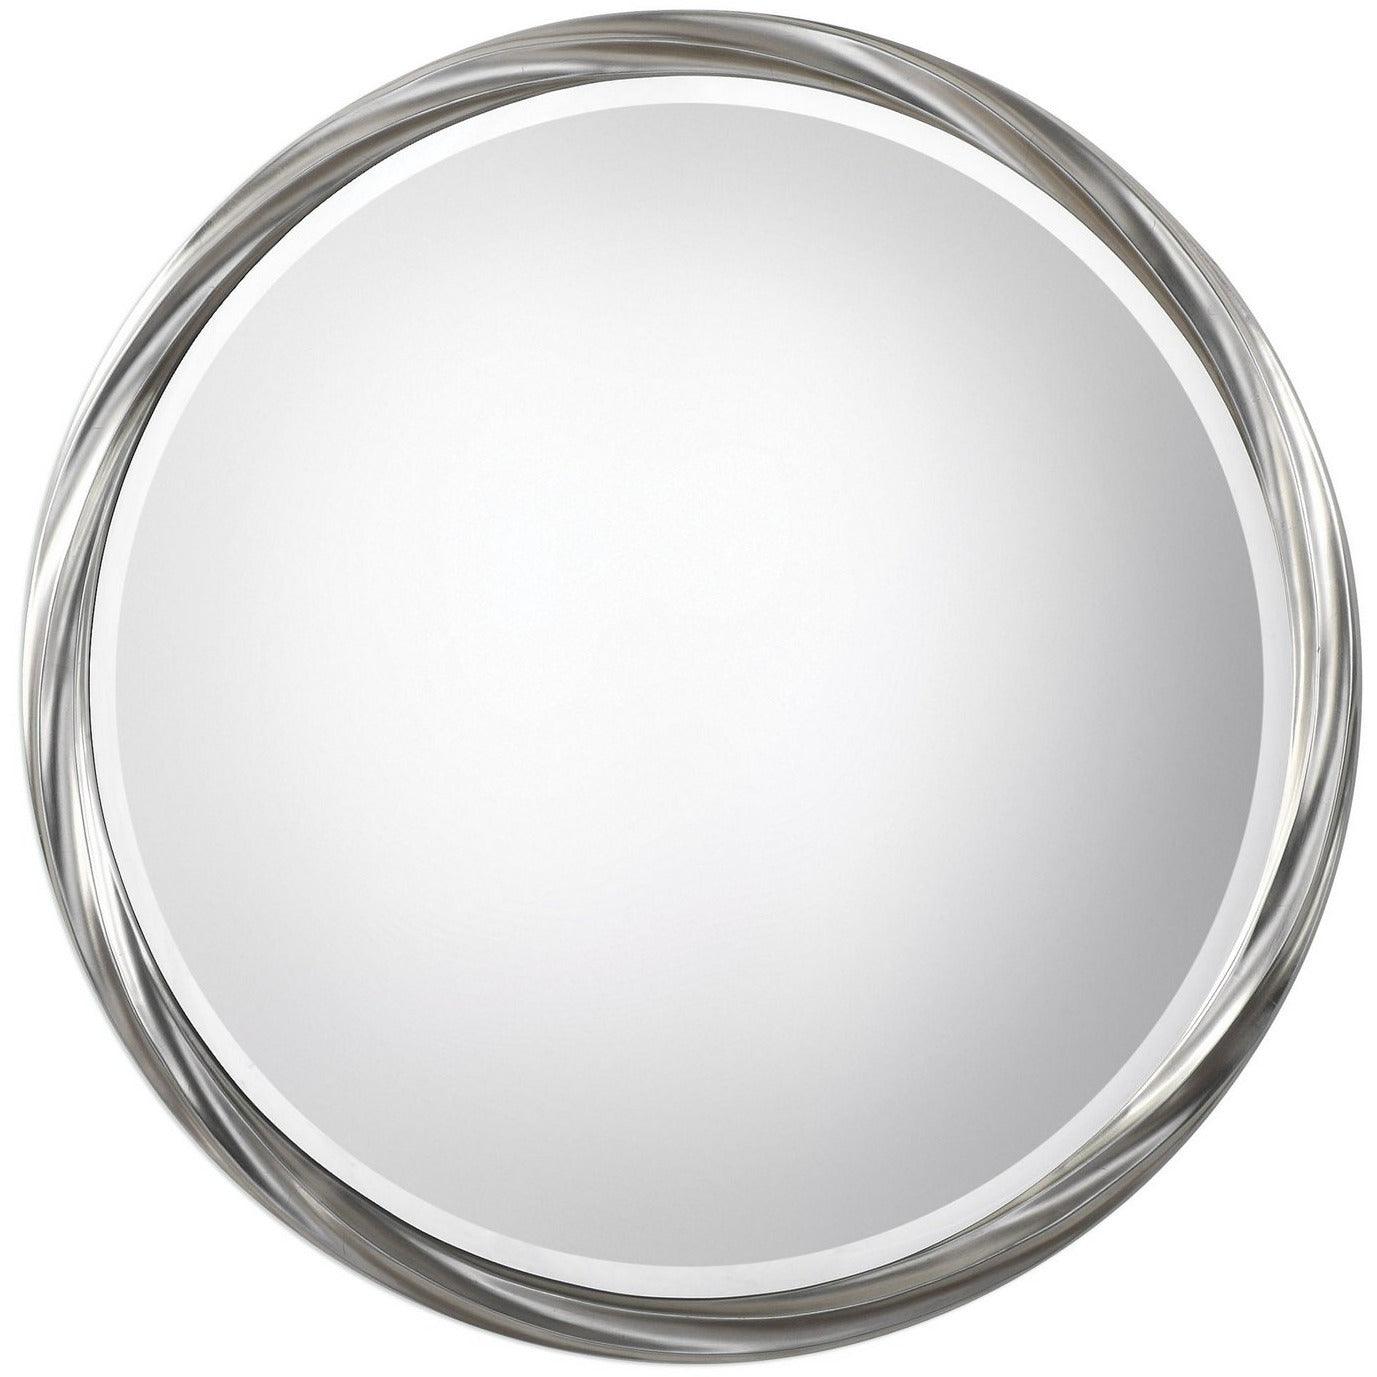 The Uttermost - Orion Mirror - 09278 | Montreal Lighting & Hardware